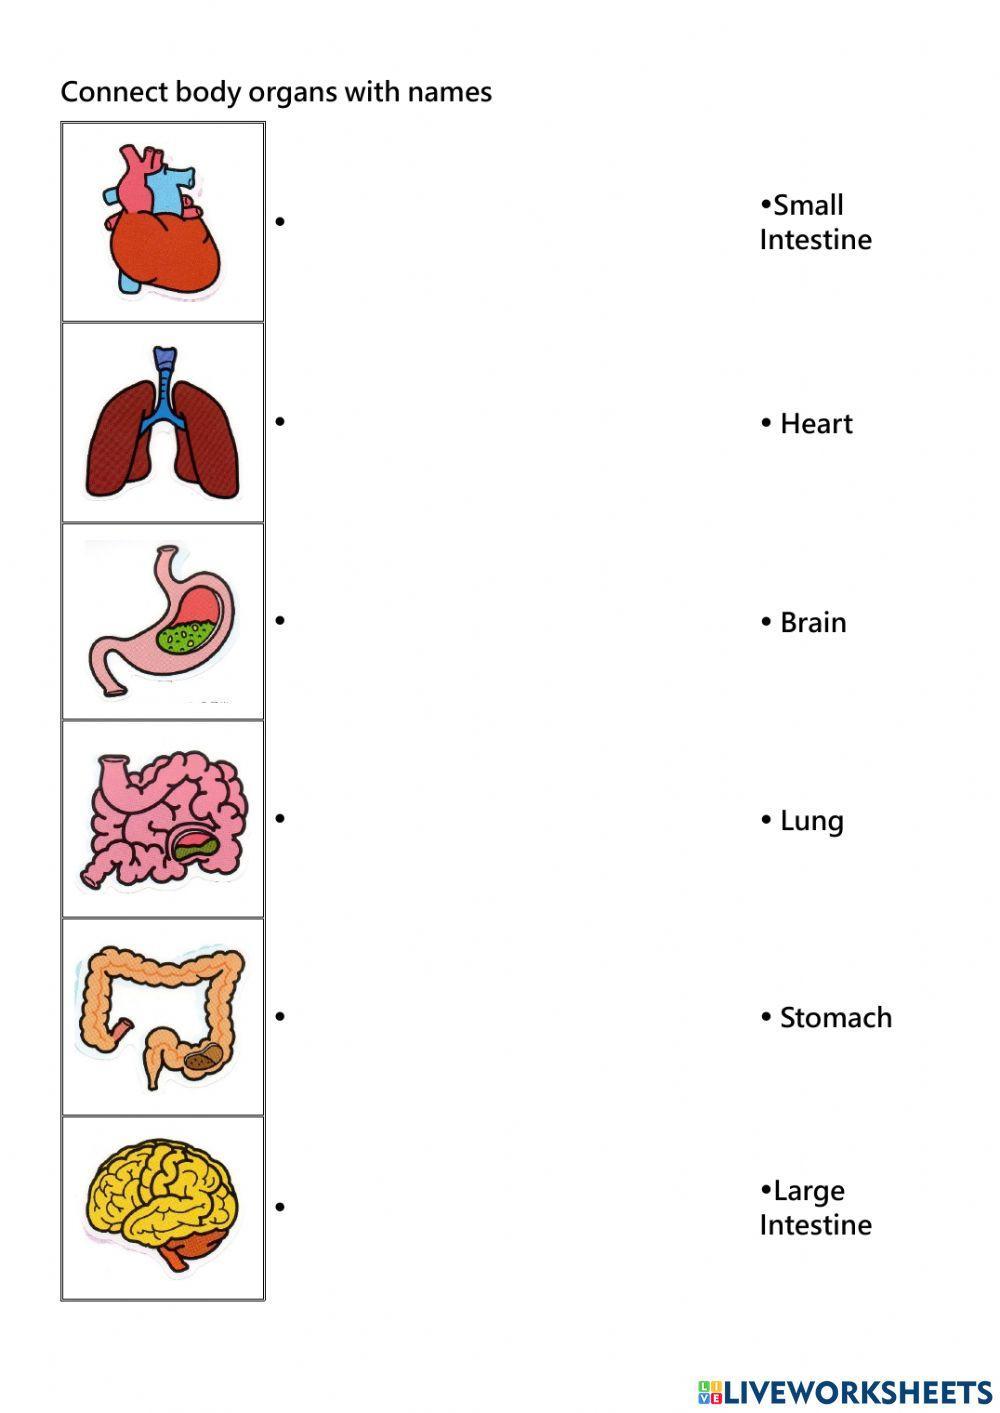 Know the organs of the body